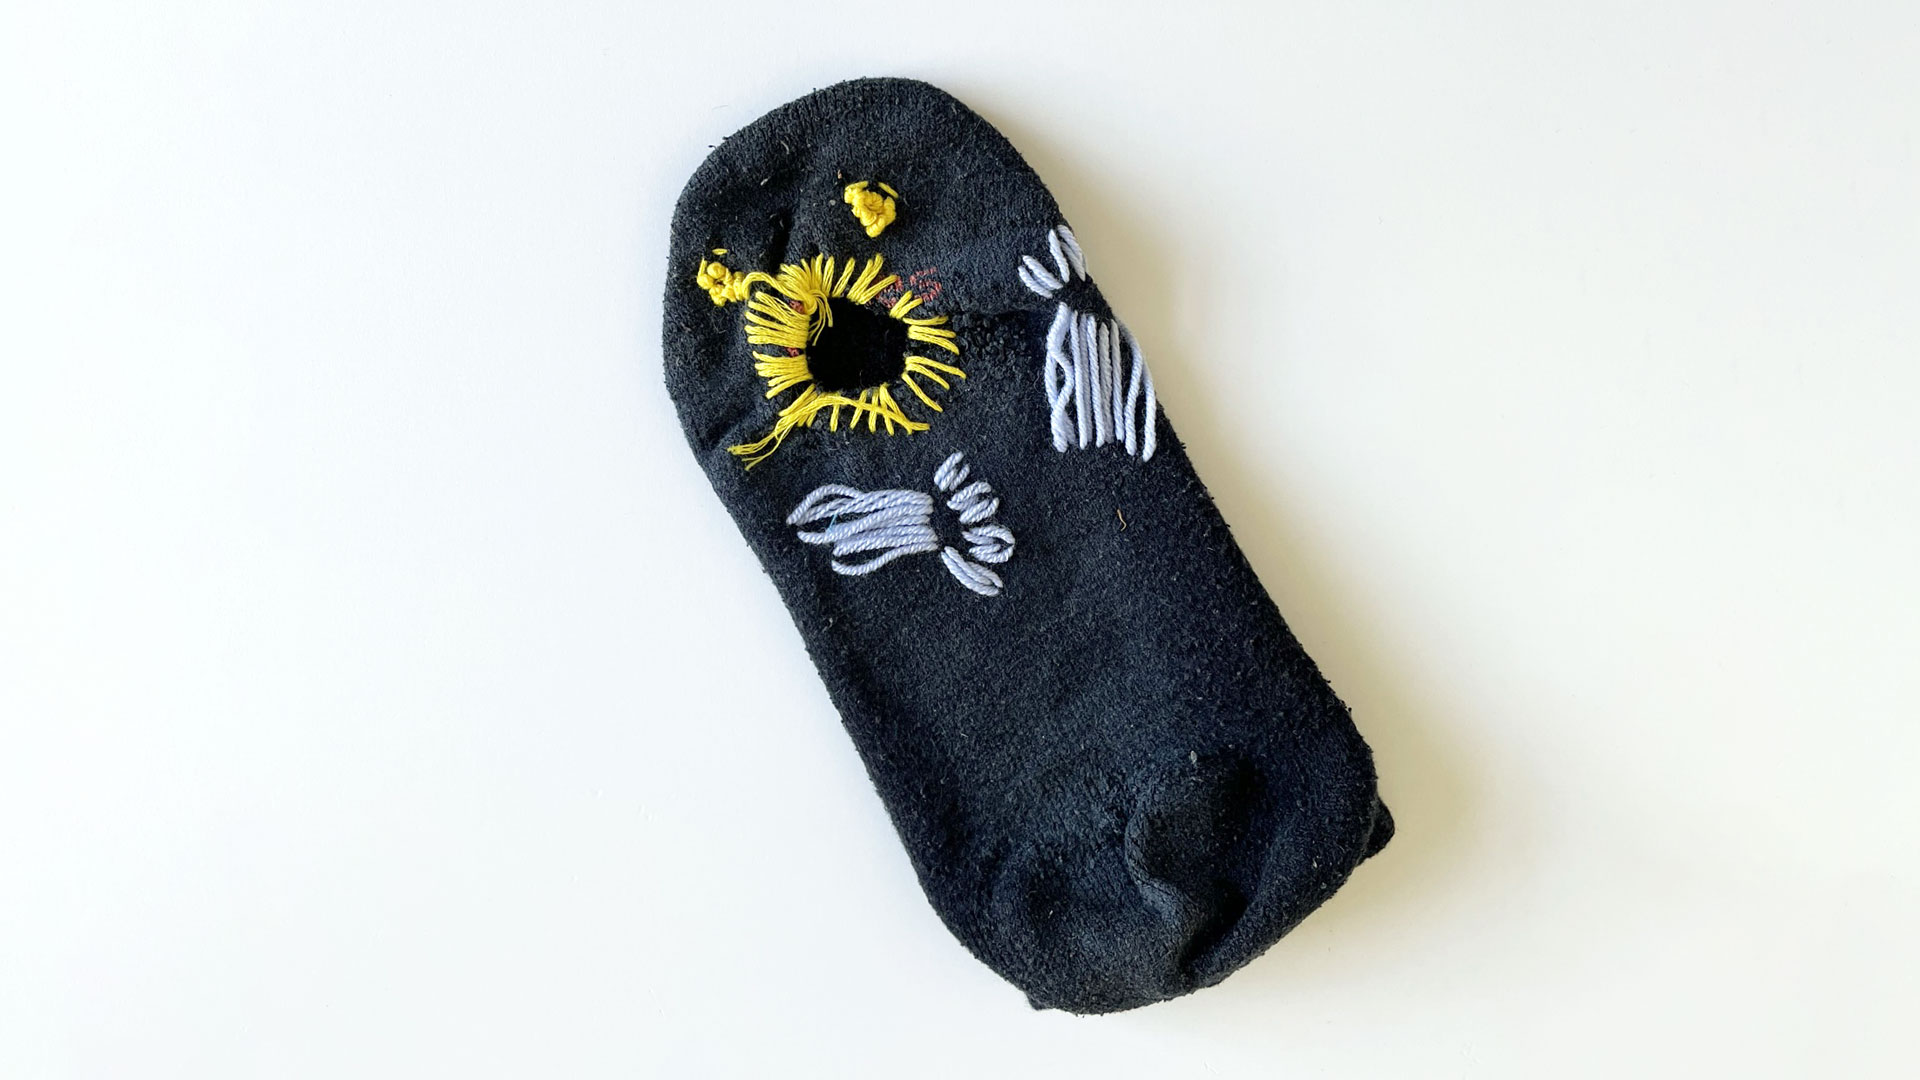 A black sock with yellow and blue embroidery decoration